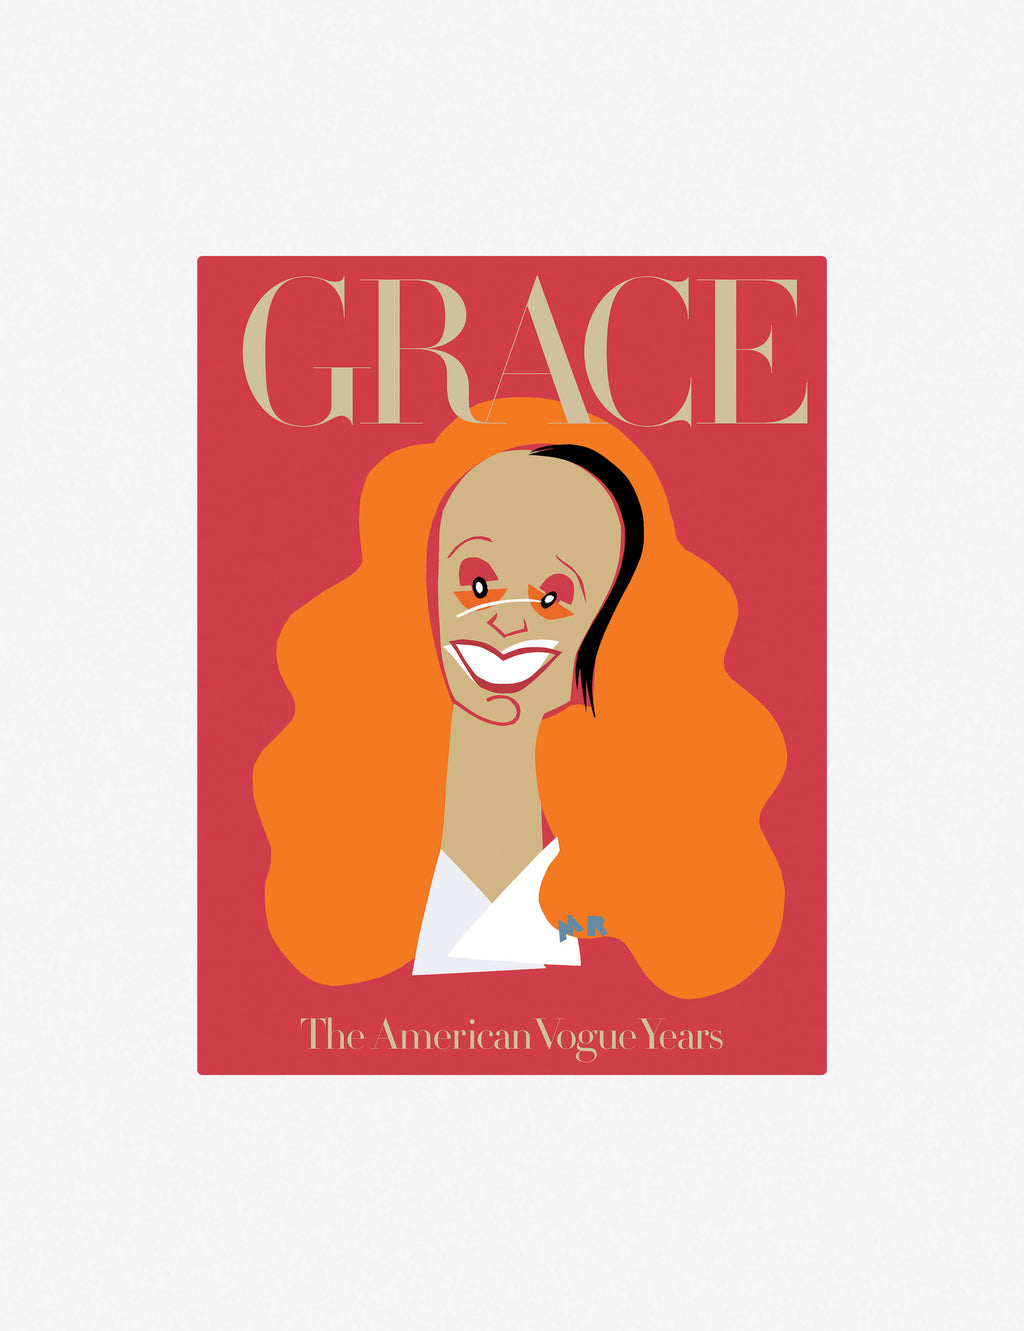 Grace - The American Vogue Years' Book by Grace Coddington